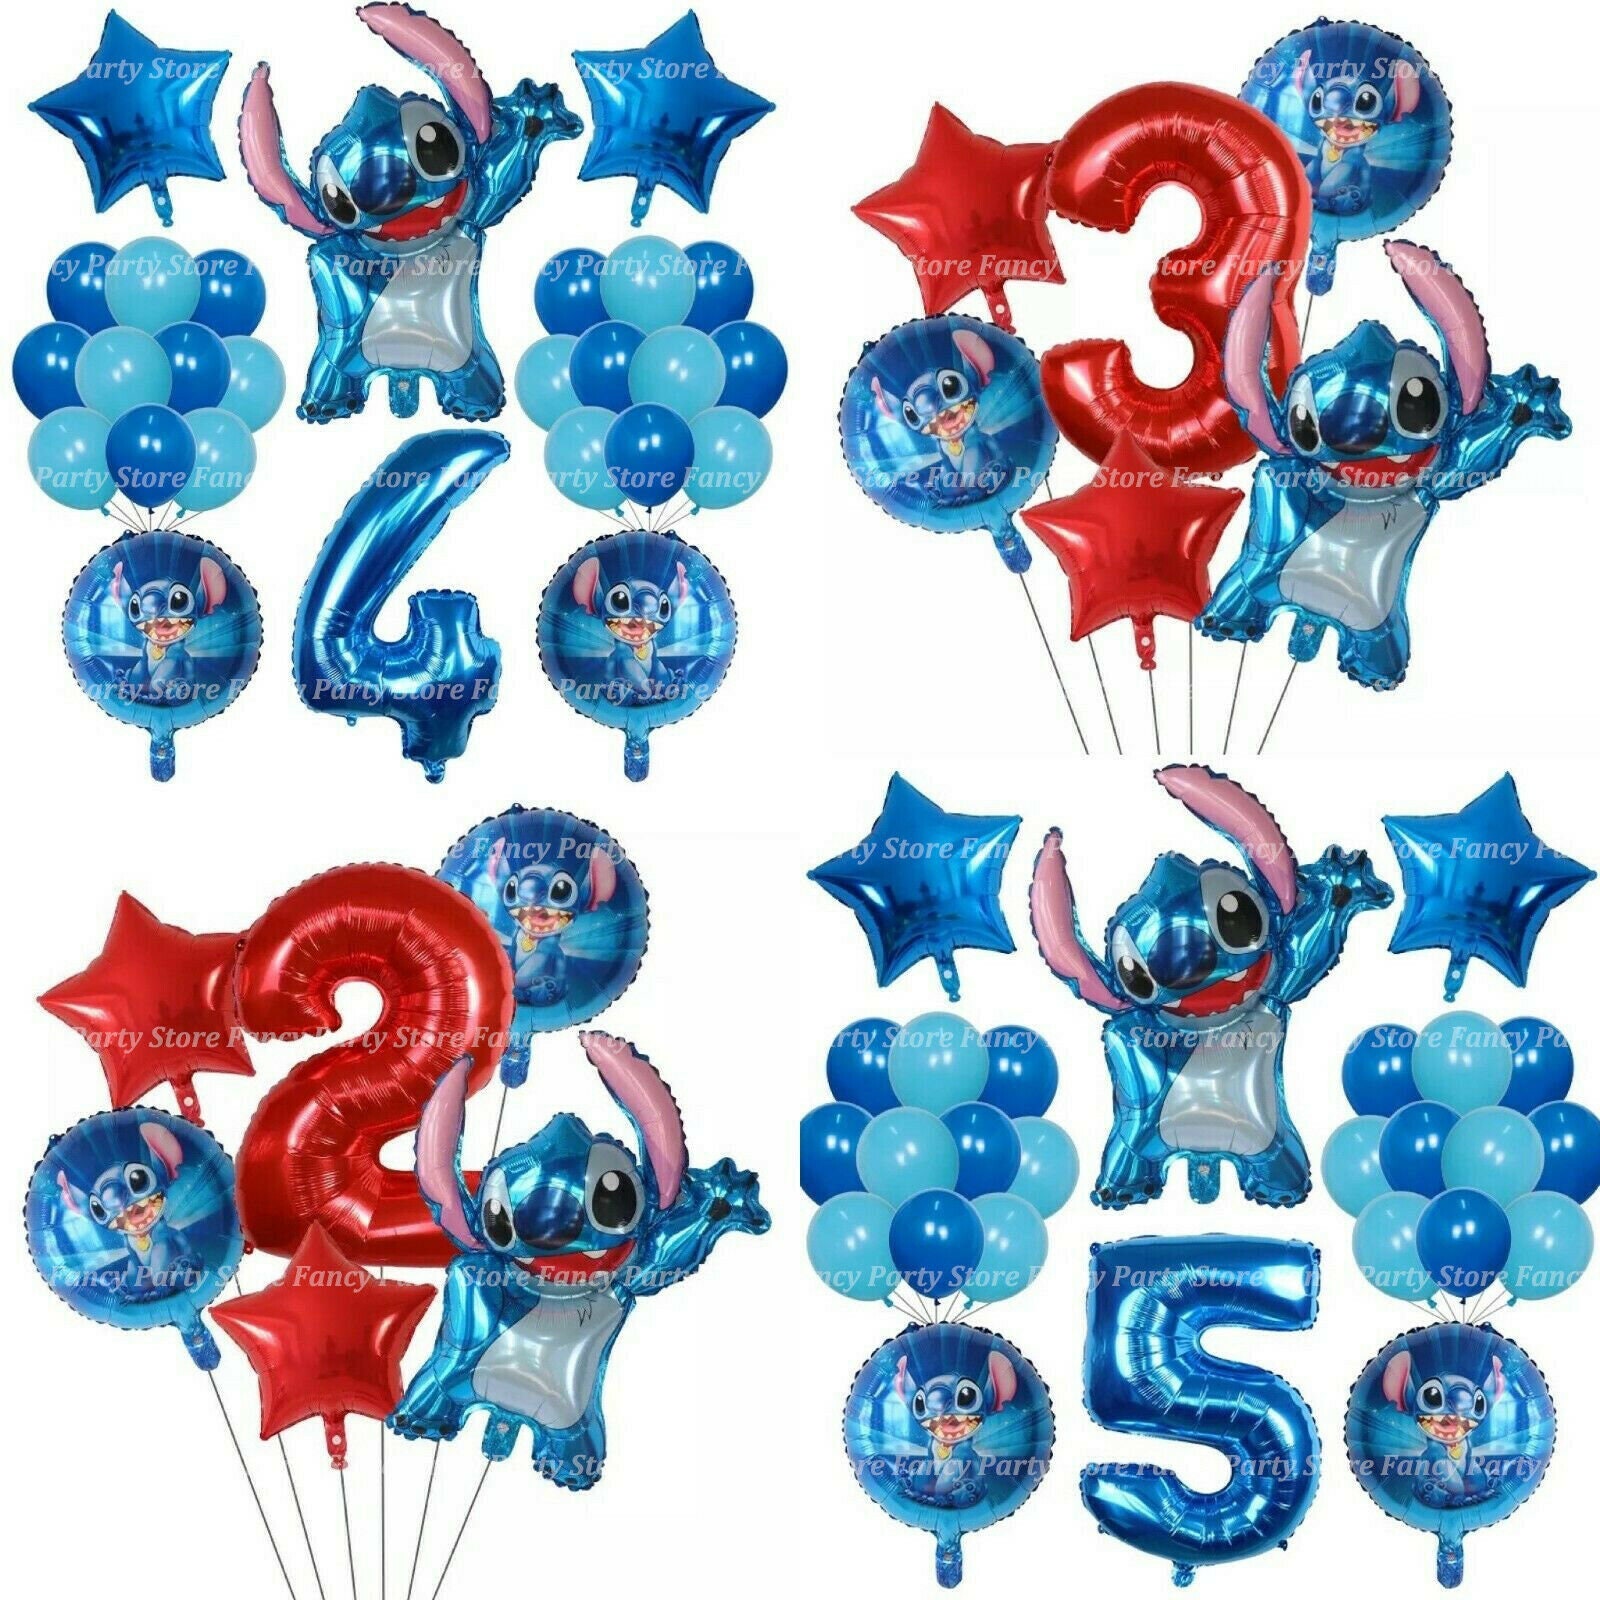 Lilo and Stitch Balloons Cartoon Character Birthday Stitch Party Decorations  Age Number Balloon Lilo and Stitch Birthday Party -  Finland